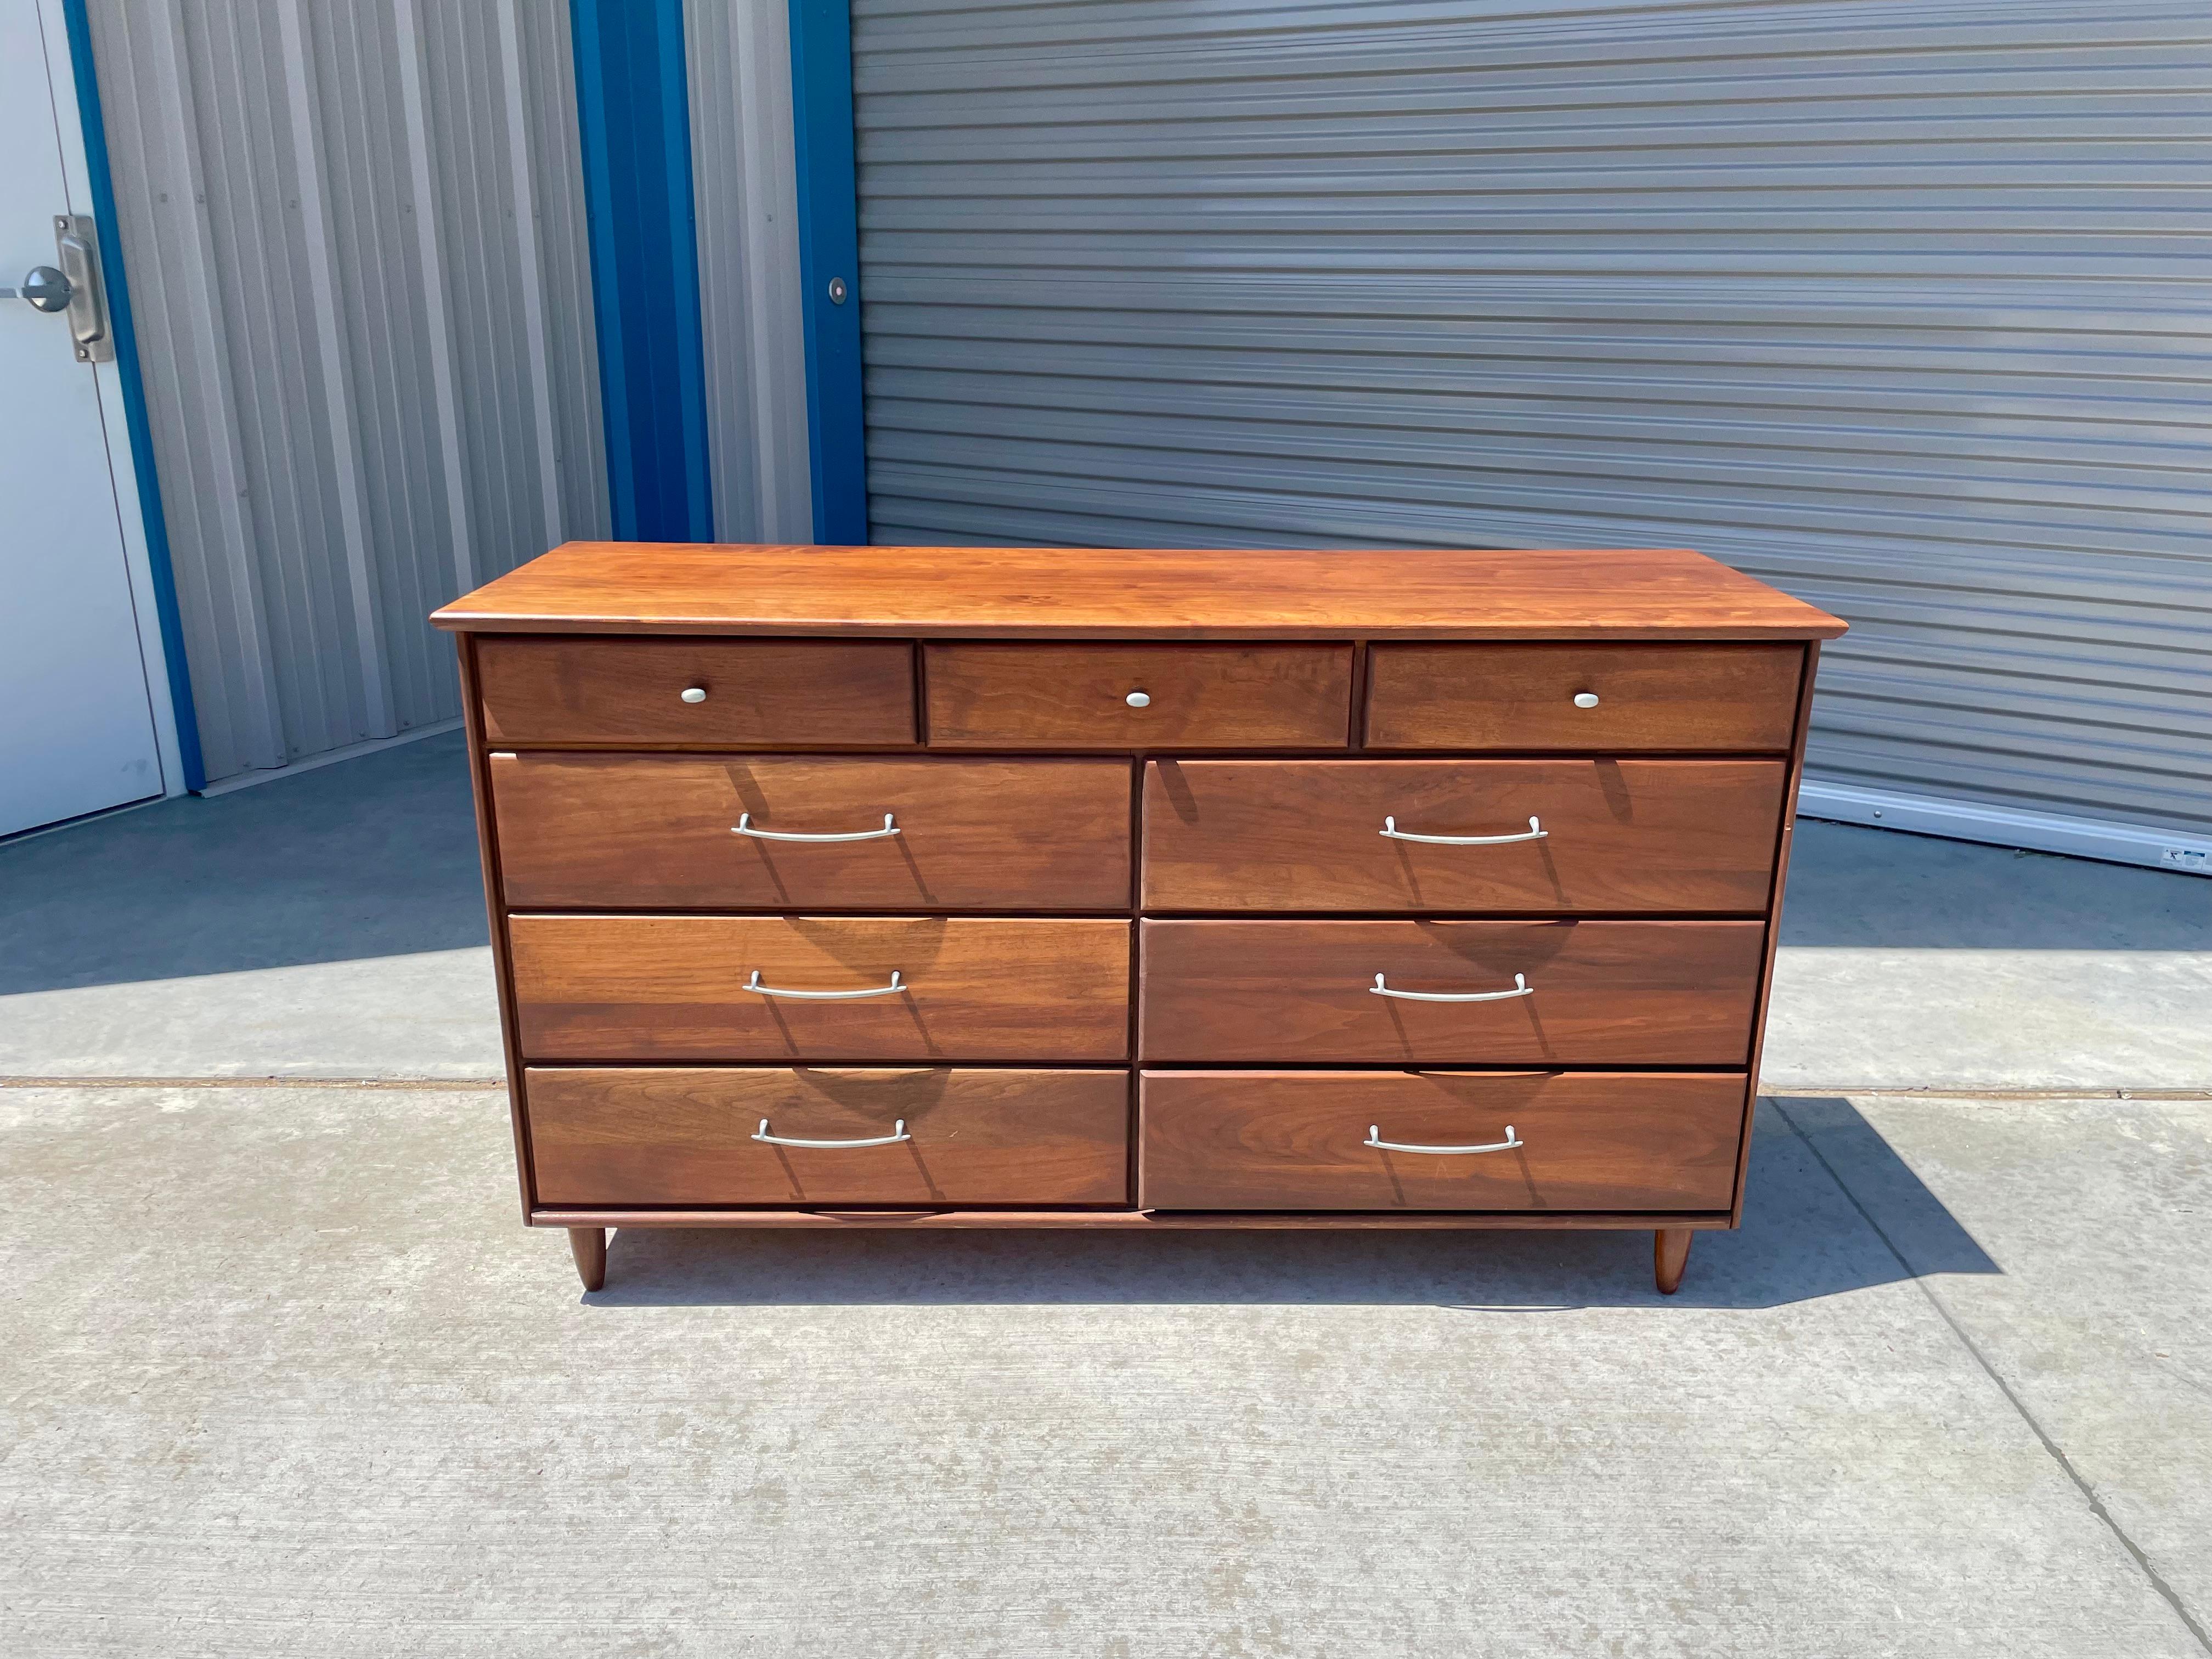 Mid-century walnut dresser designed and manufactured by Ace-Hi in the United States circa 1960s. This stunning dresser has nine pull-out drawers with aluminum handles, making it easy to push or pull out the drawers. The dresser also features a